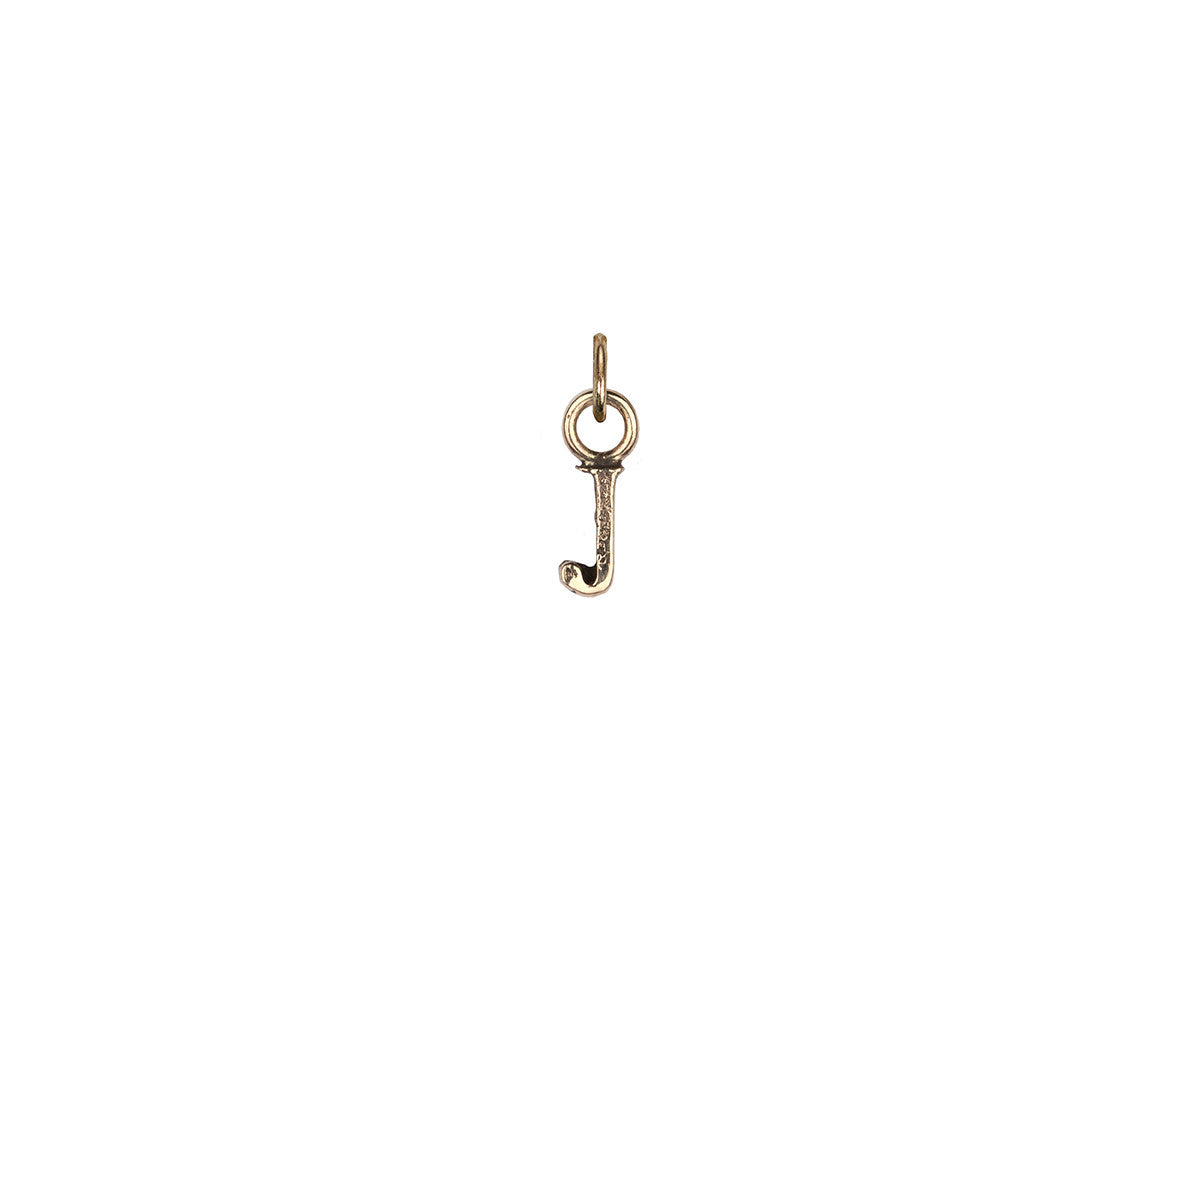 A 14k gold charm in the shape of the letter "J".